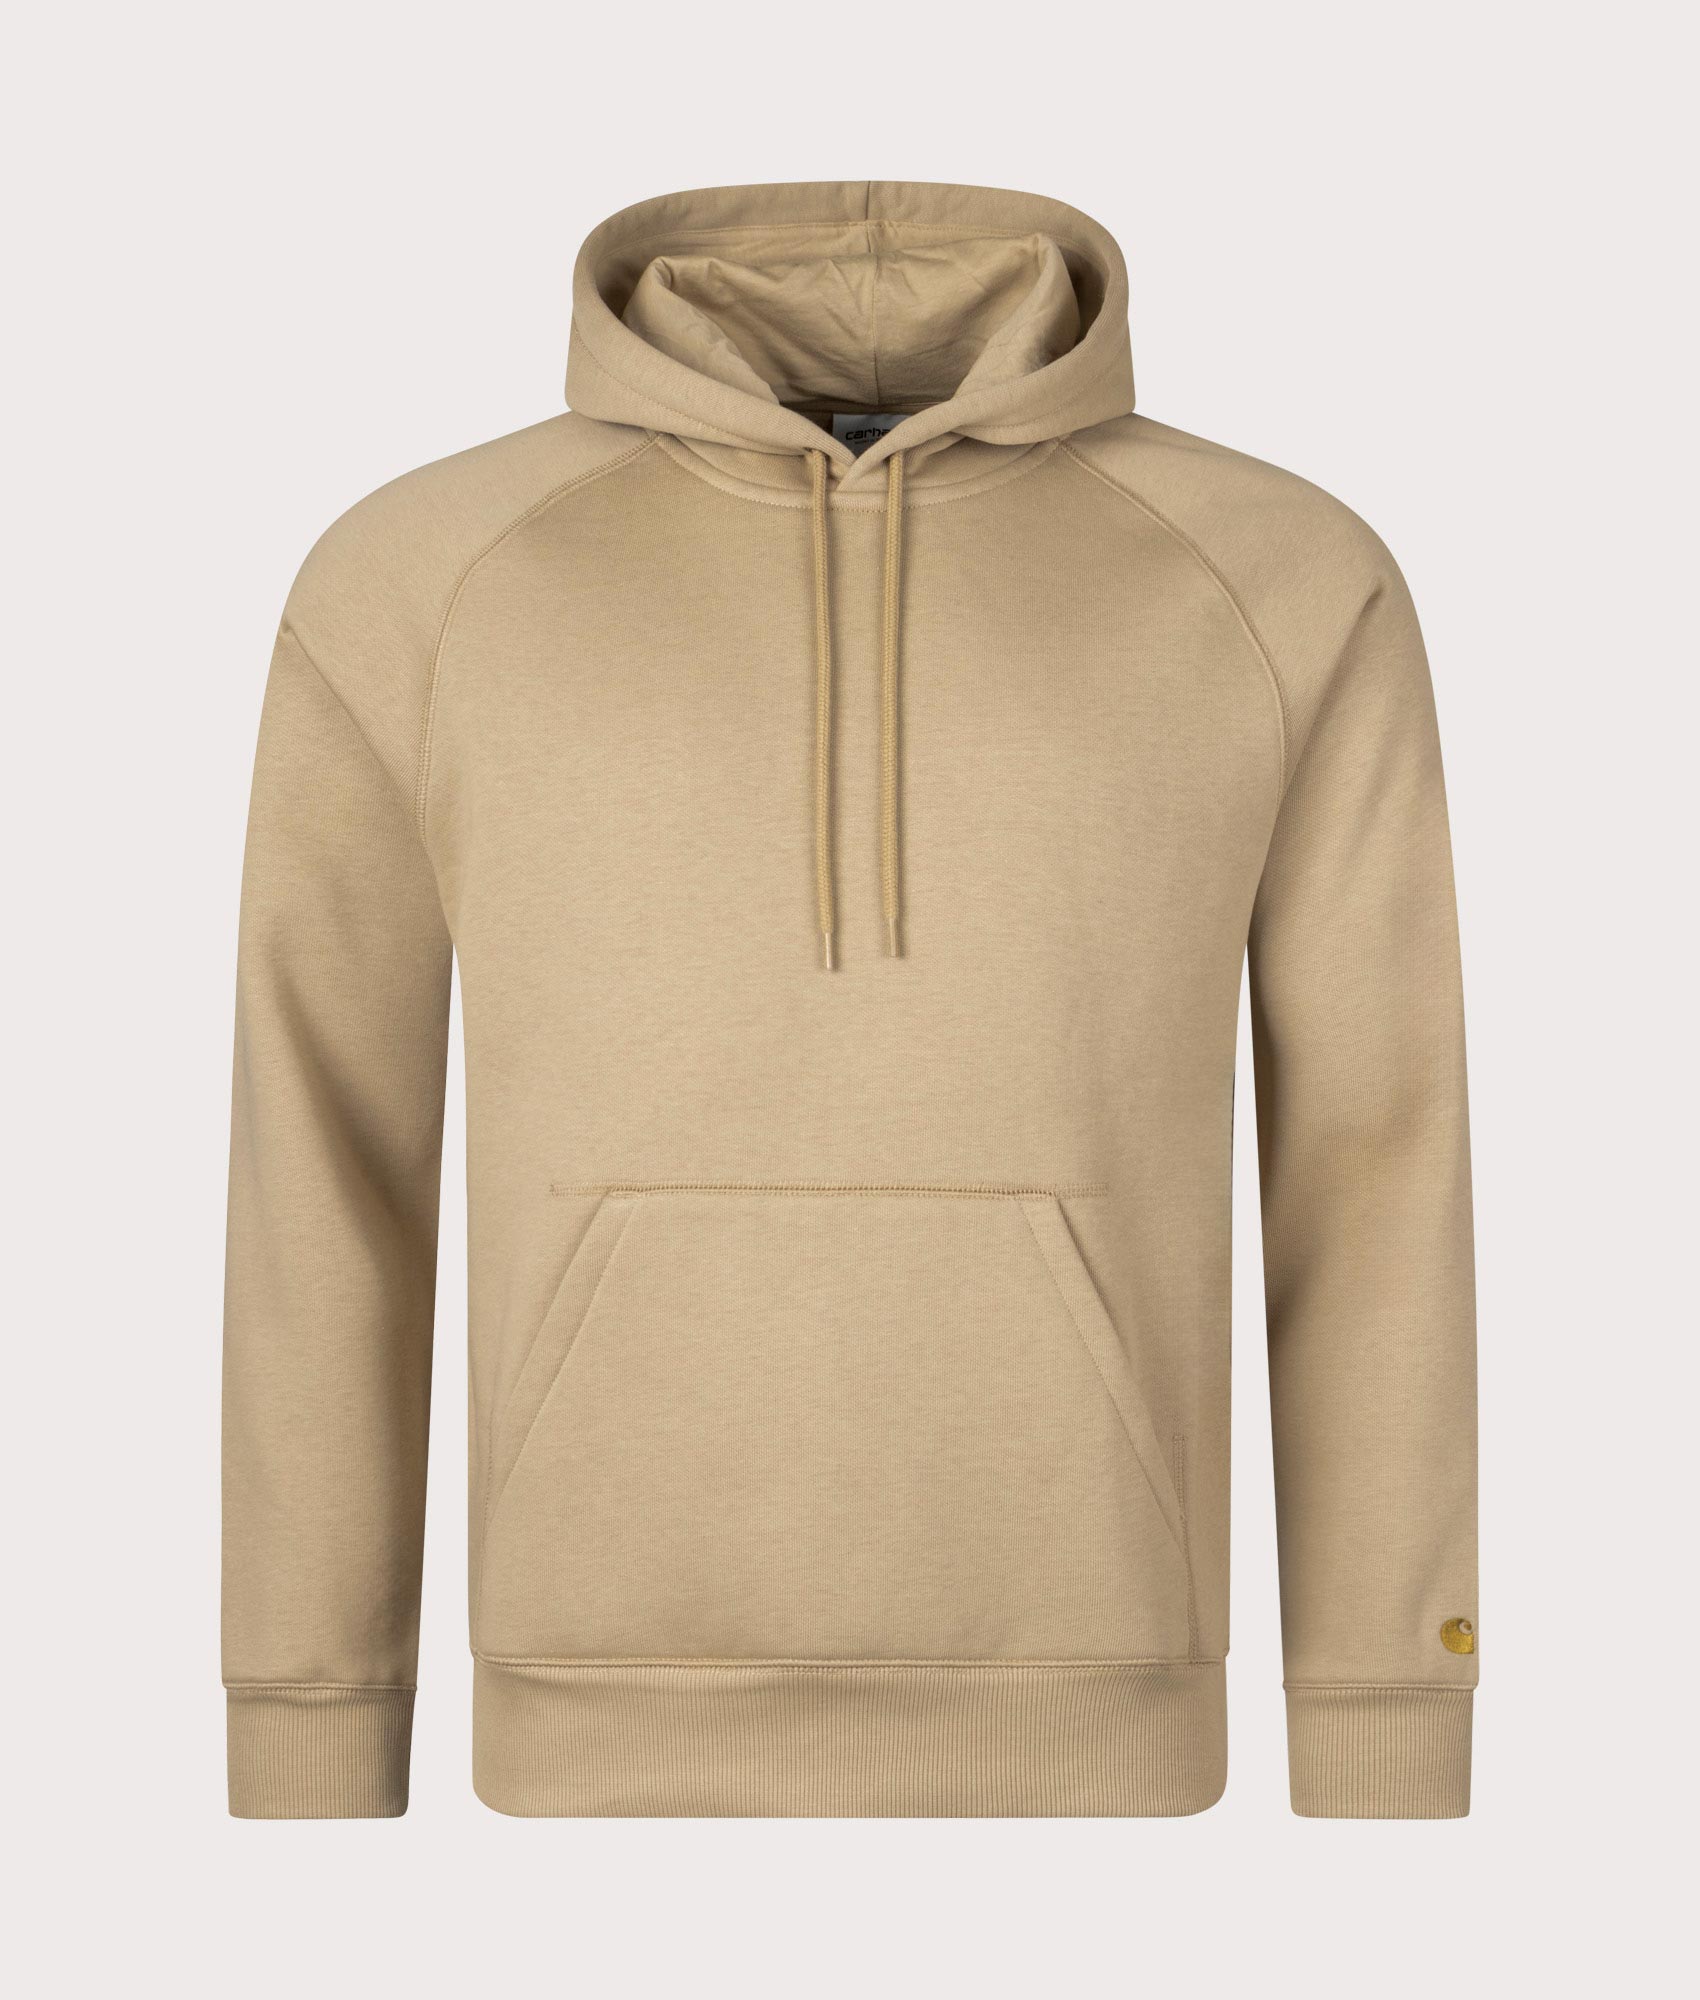 Carhartt WIP Mens Chase Hoodie - Colour: 22IXX Sable/Gold - Size: Large